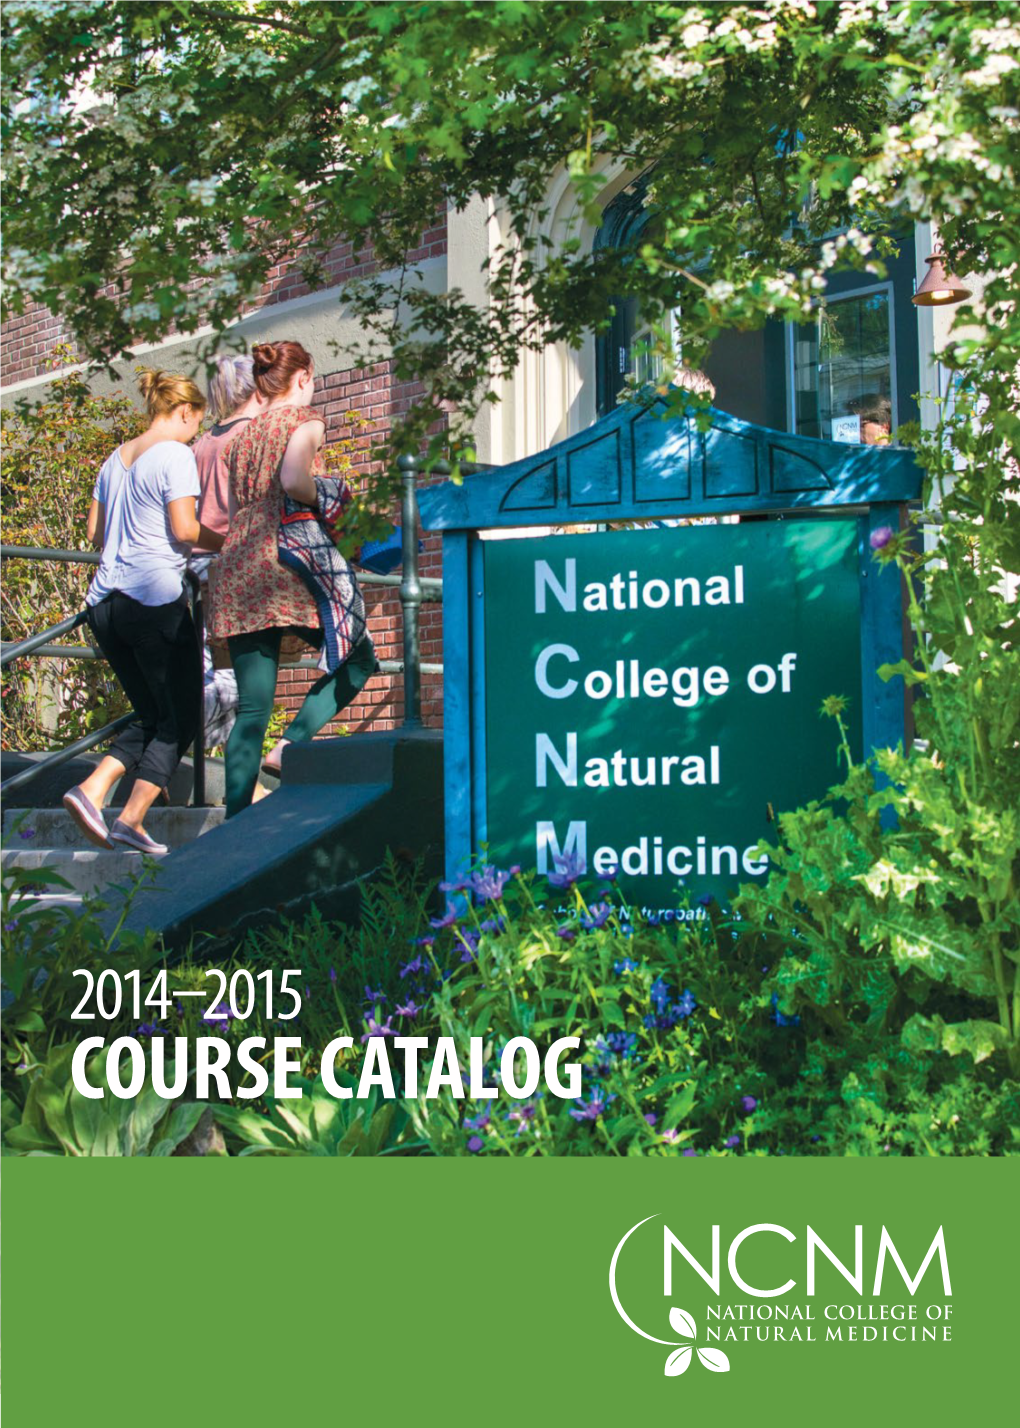 COURSE CATALOG Institutional and Program Accreditation